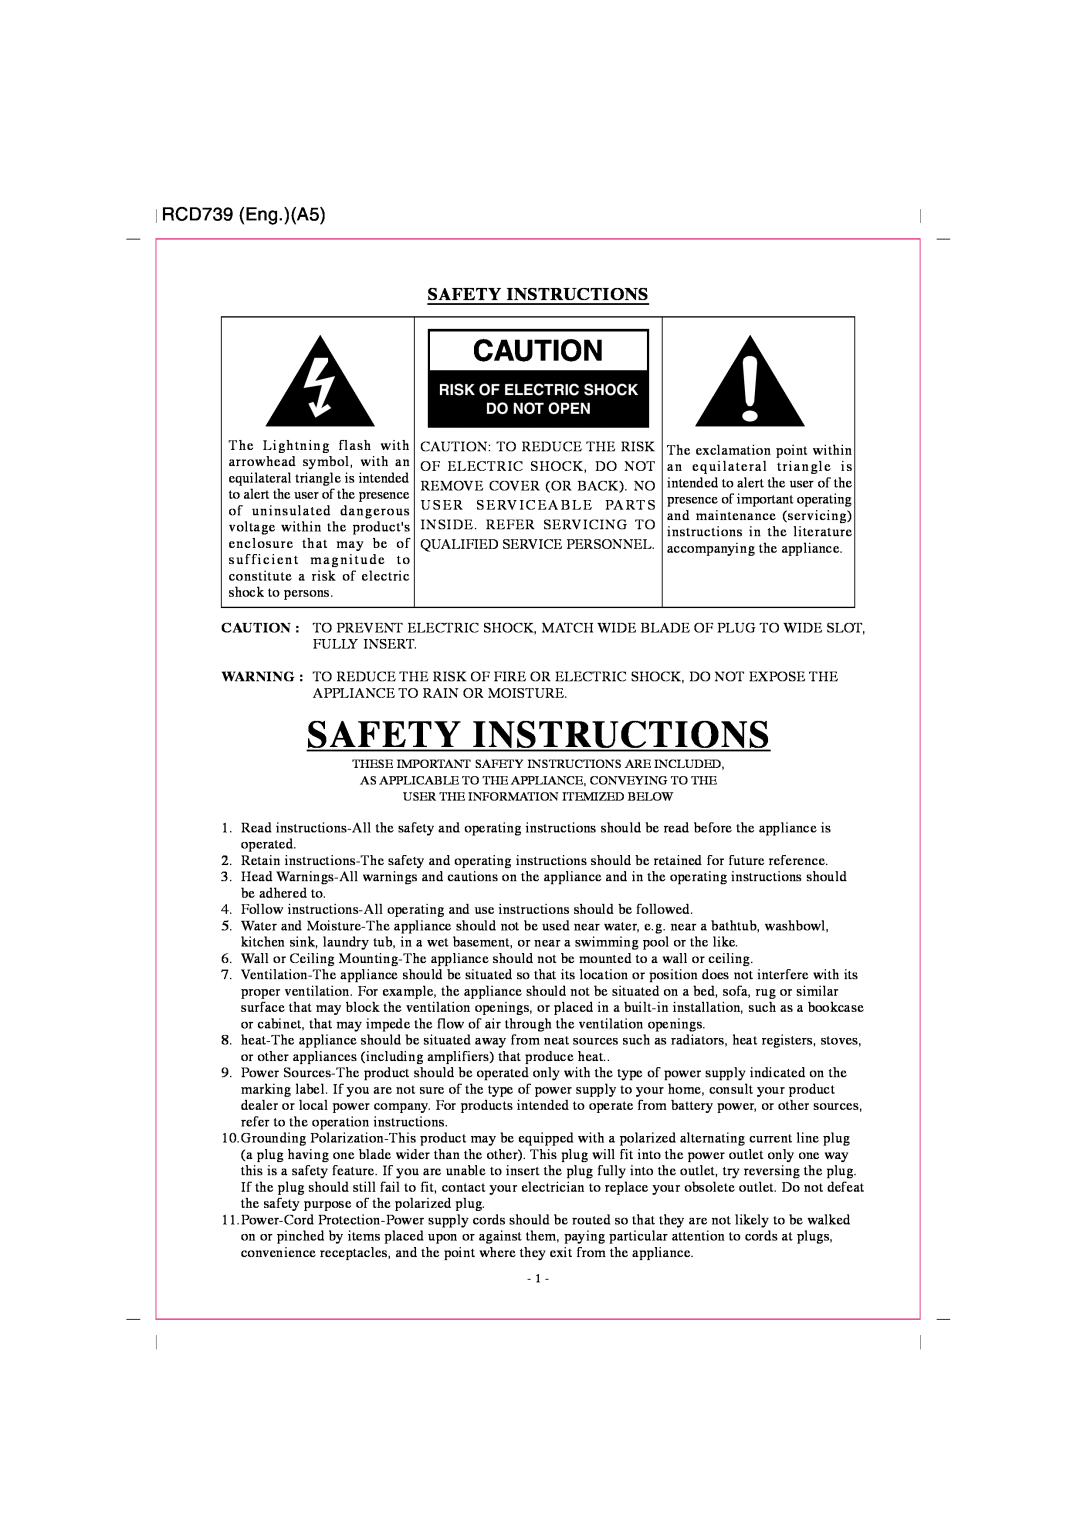 Curtis RCD739UK instruction manual RCD739 Eng.A5, Safety Instructions, Risk Of Electric Shock, Do Not Open 